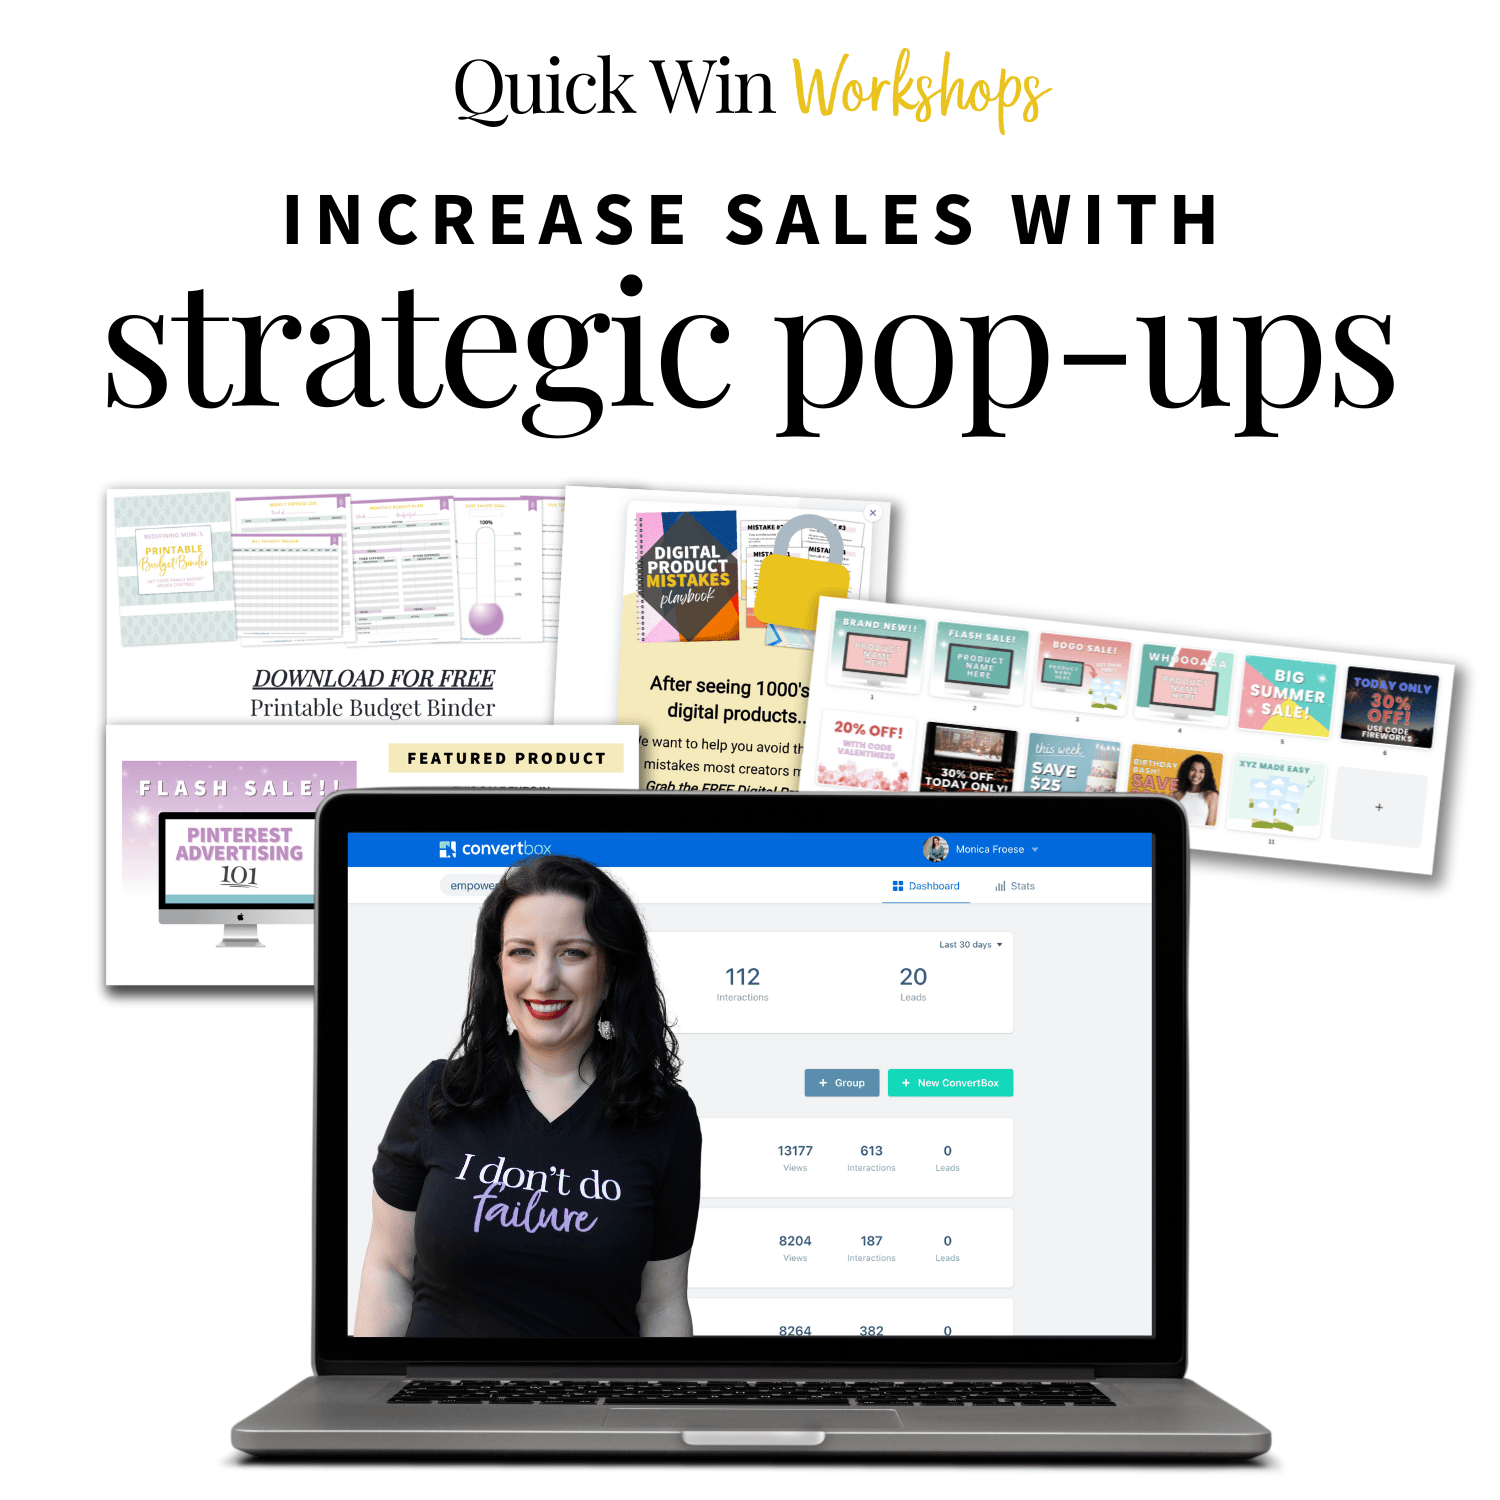 Learn how to strategically use pop-ups on your website with ConvertBox